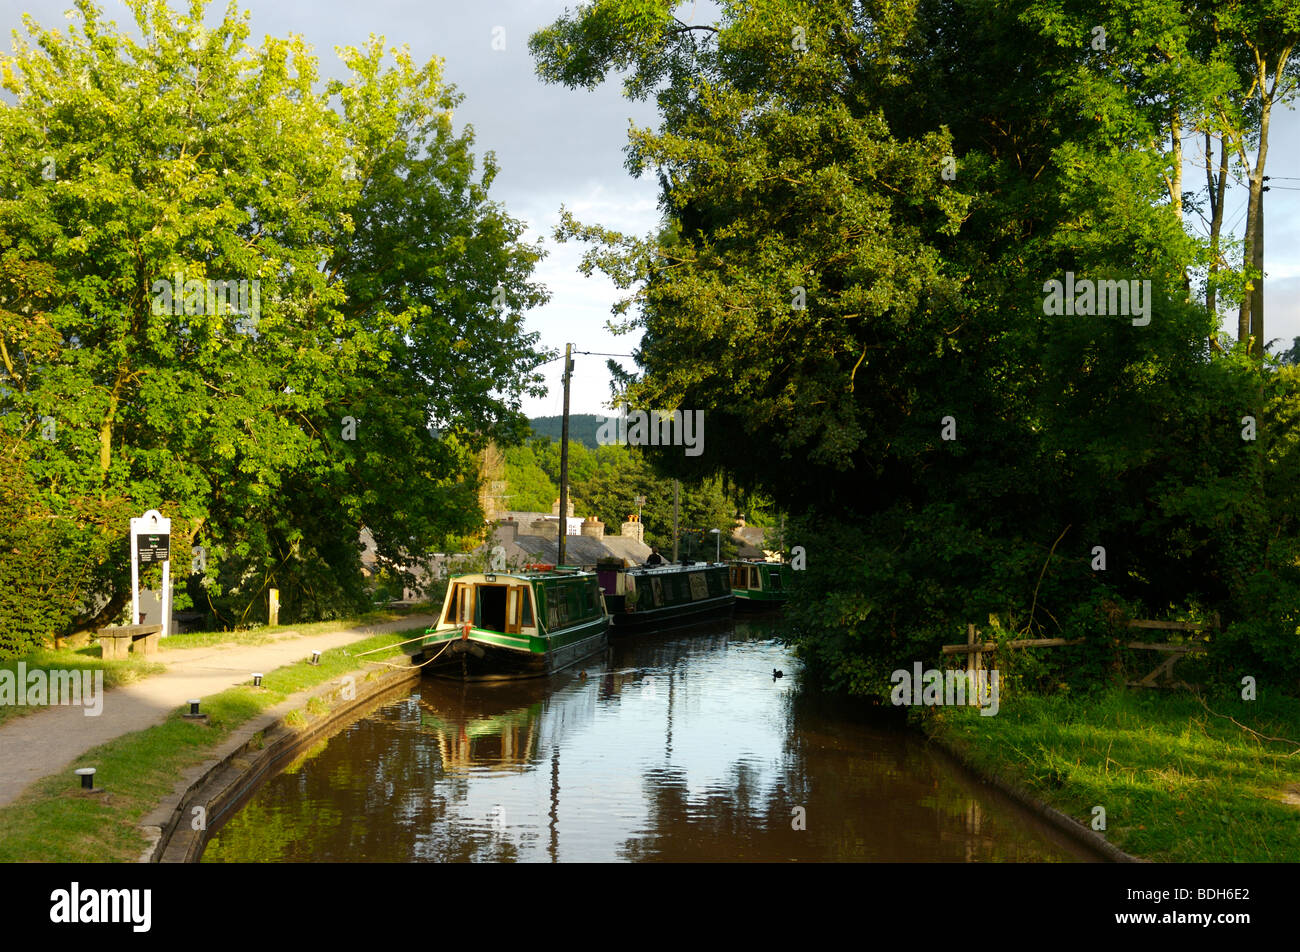 Holidays on Britain's canals. Stock Photo